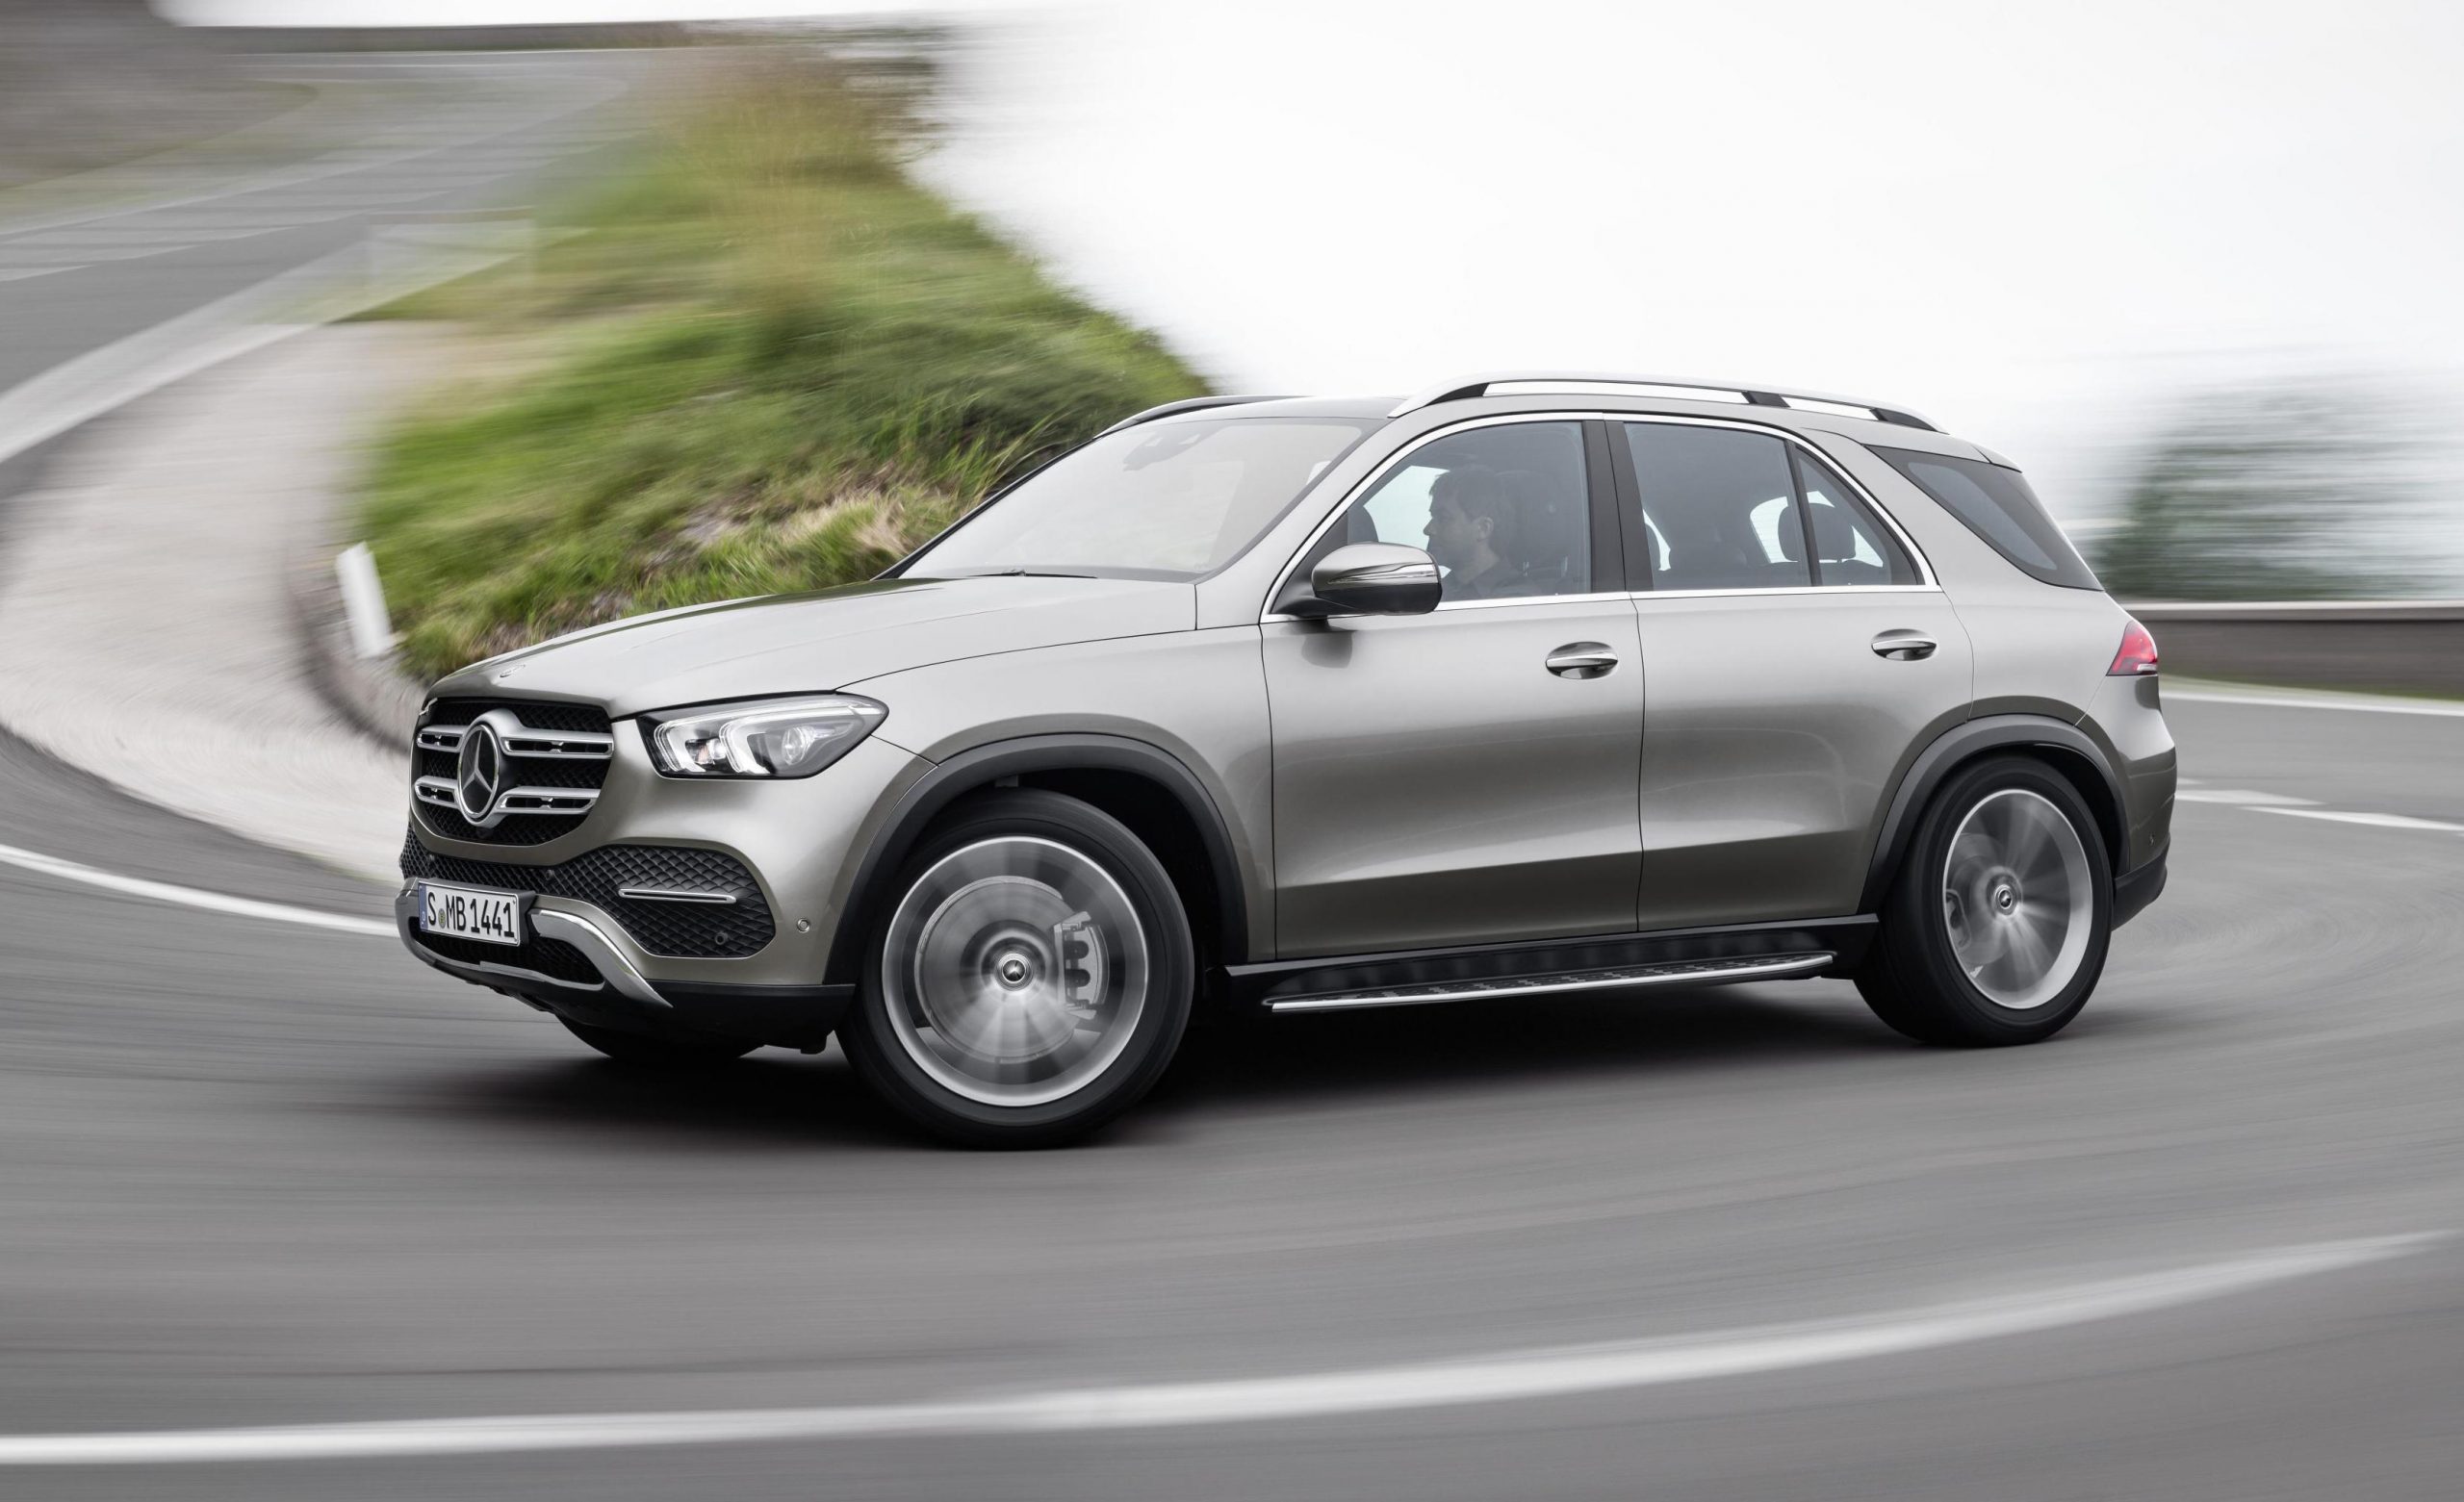 2019 Mercedes-Benz GLE now on sale in Australia from $99,900